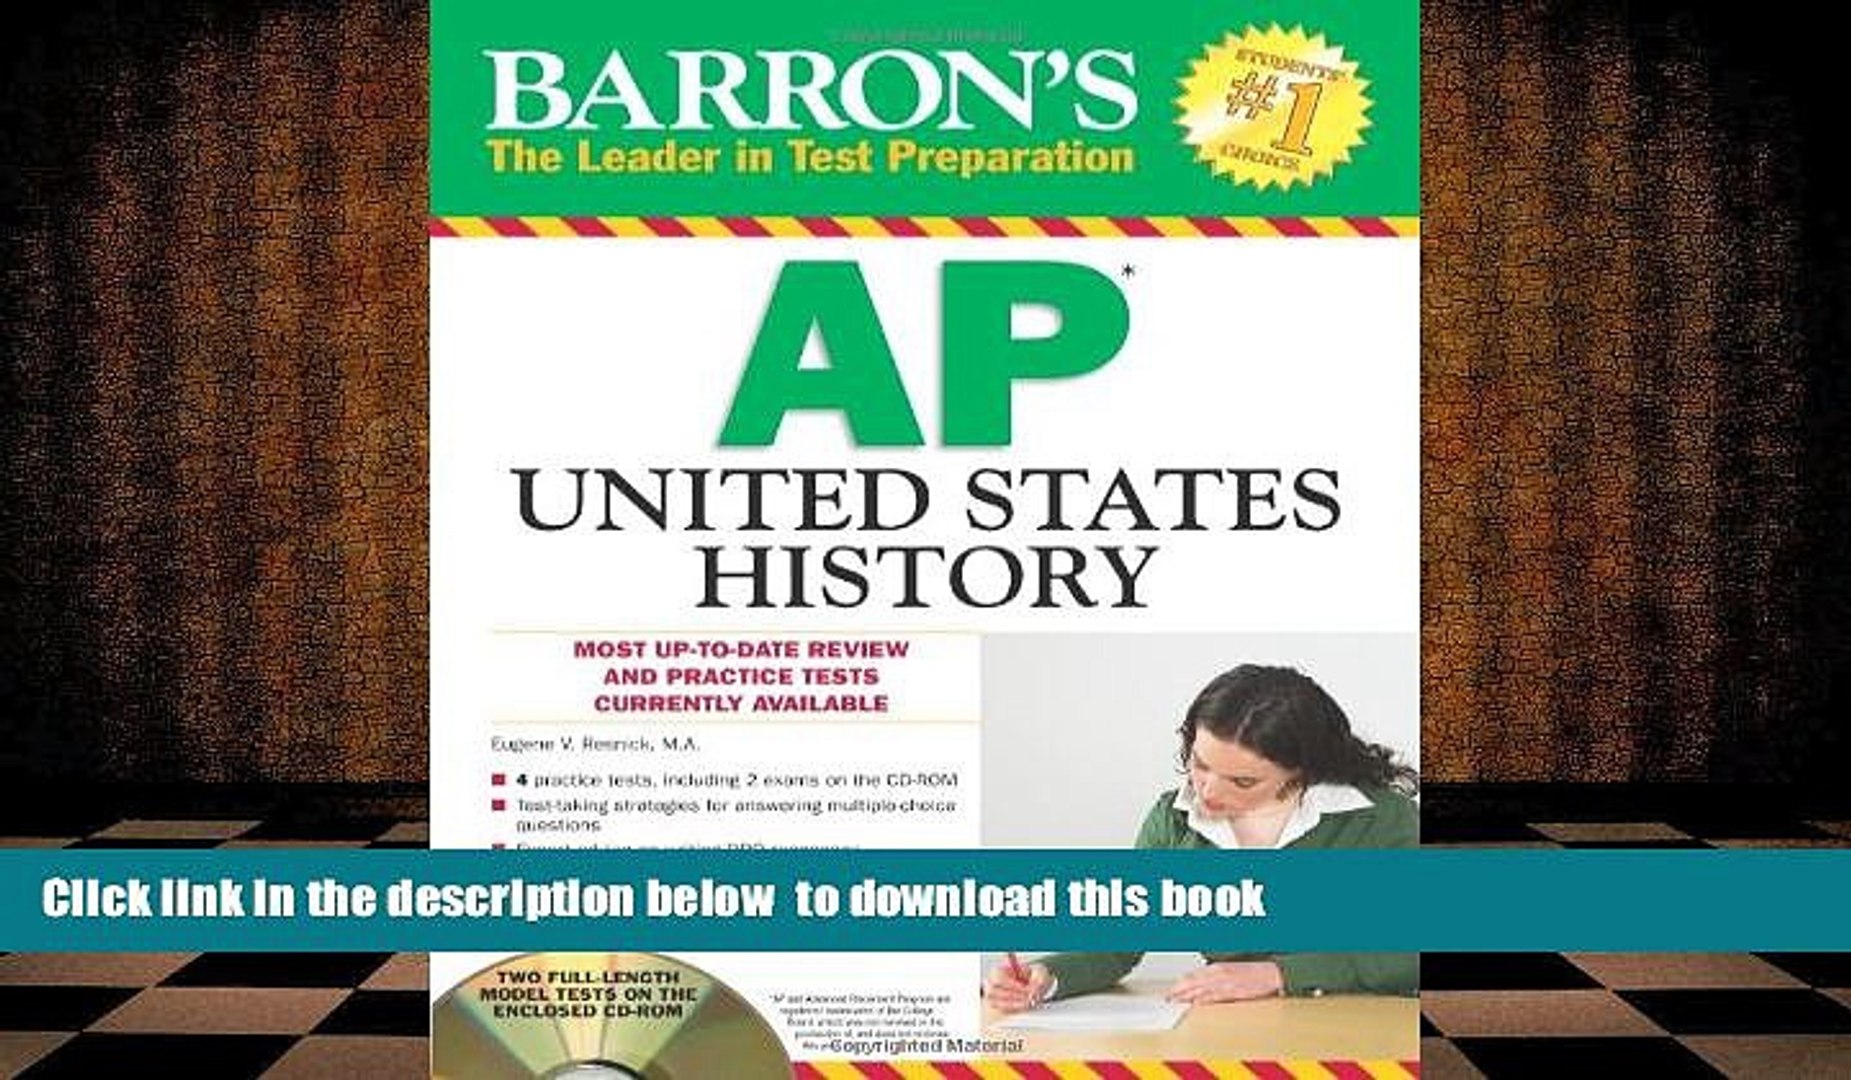 Some great features of Barron's AP United States History with CD-ROM include:

-An explanatory text
